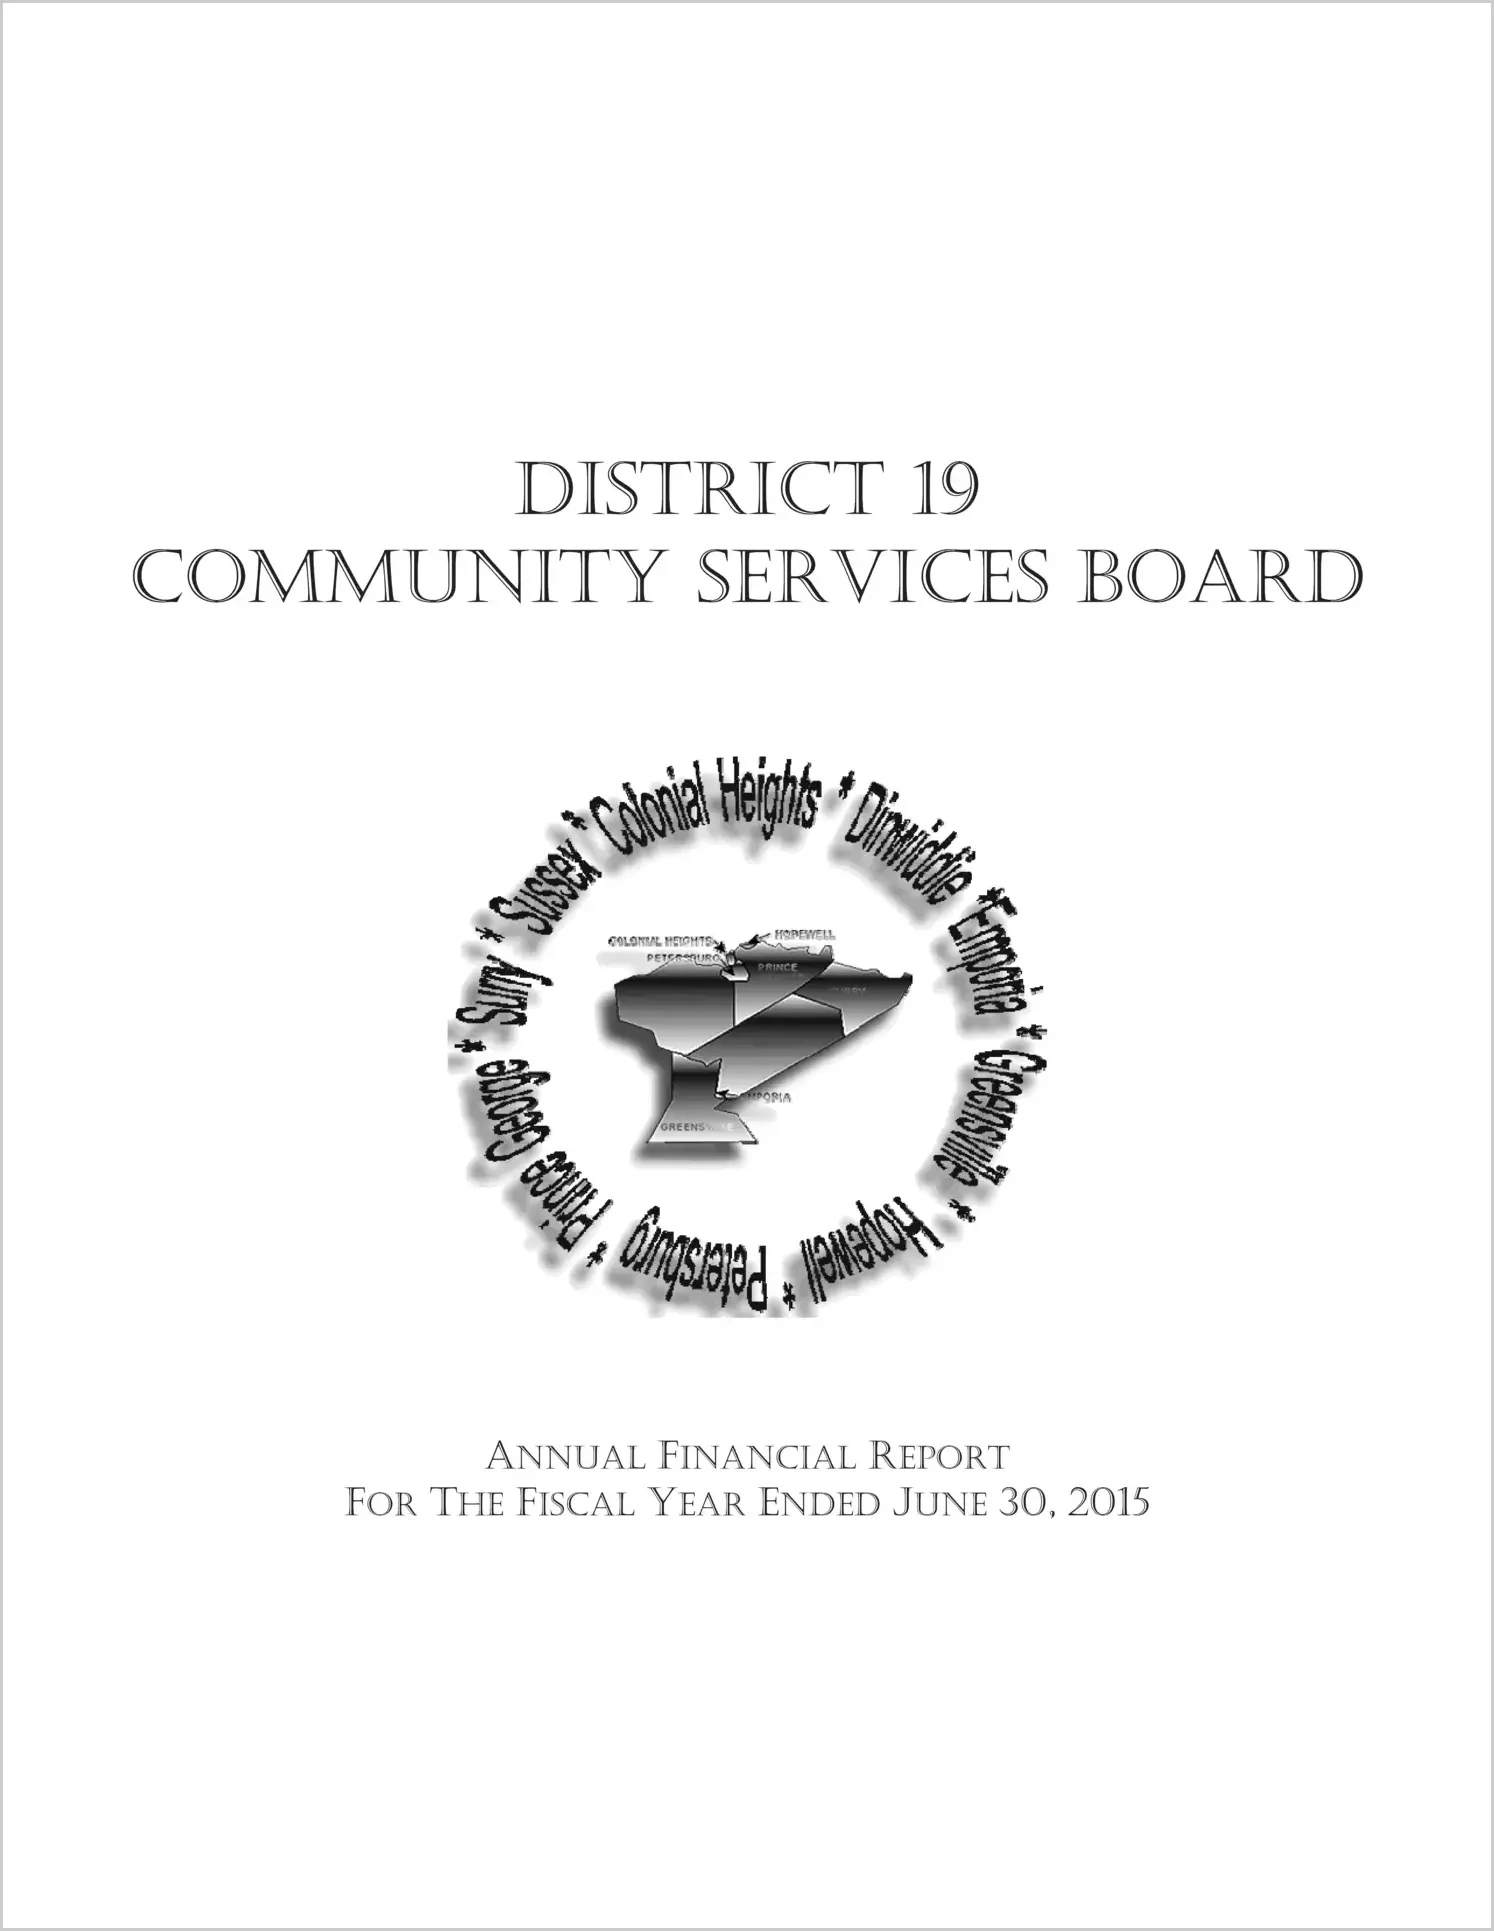 2015 ABC/Other Annual Financial Report  for District 19 Community Services Board